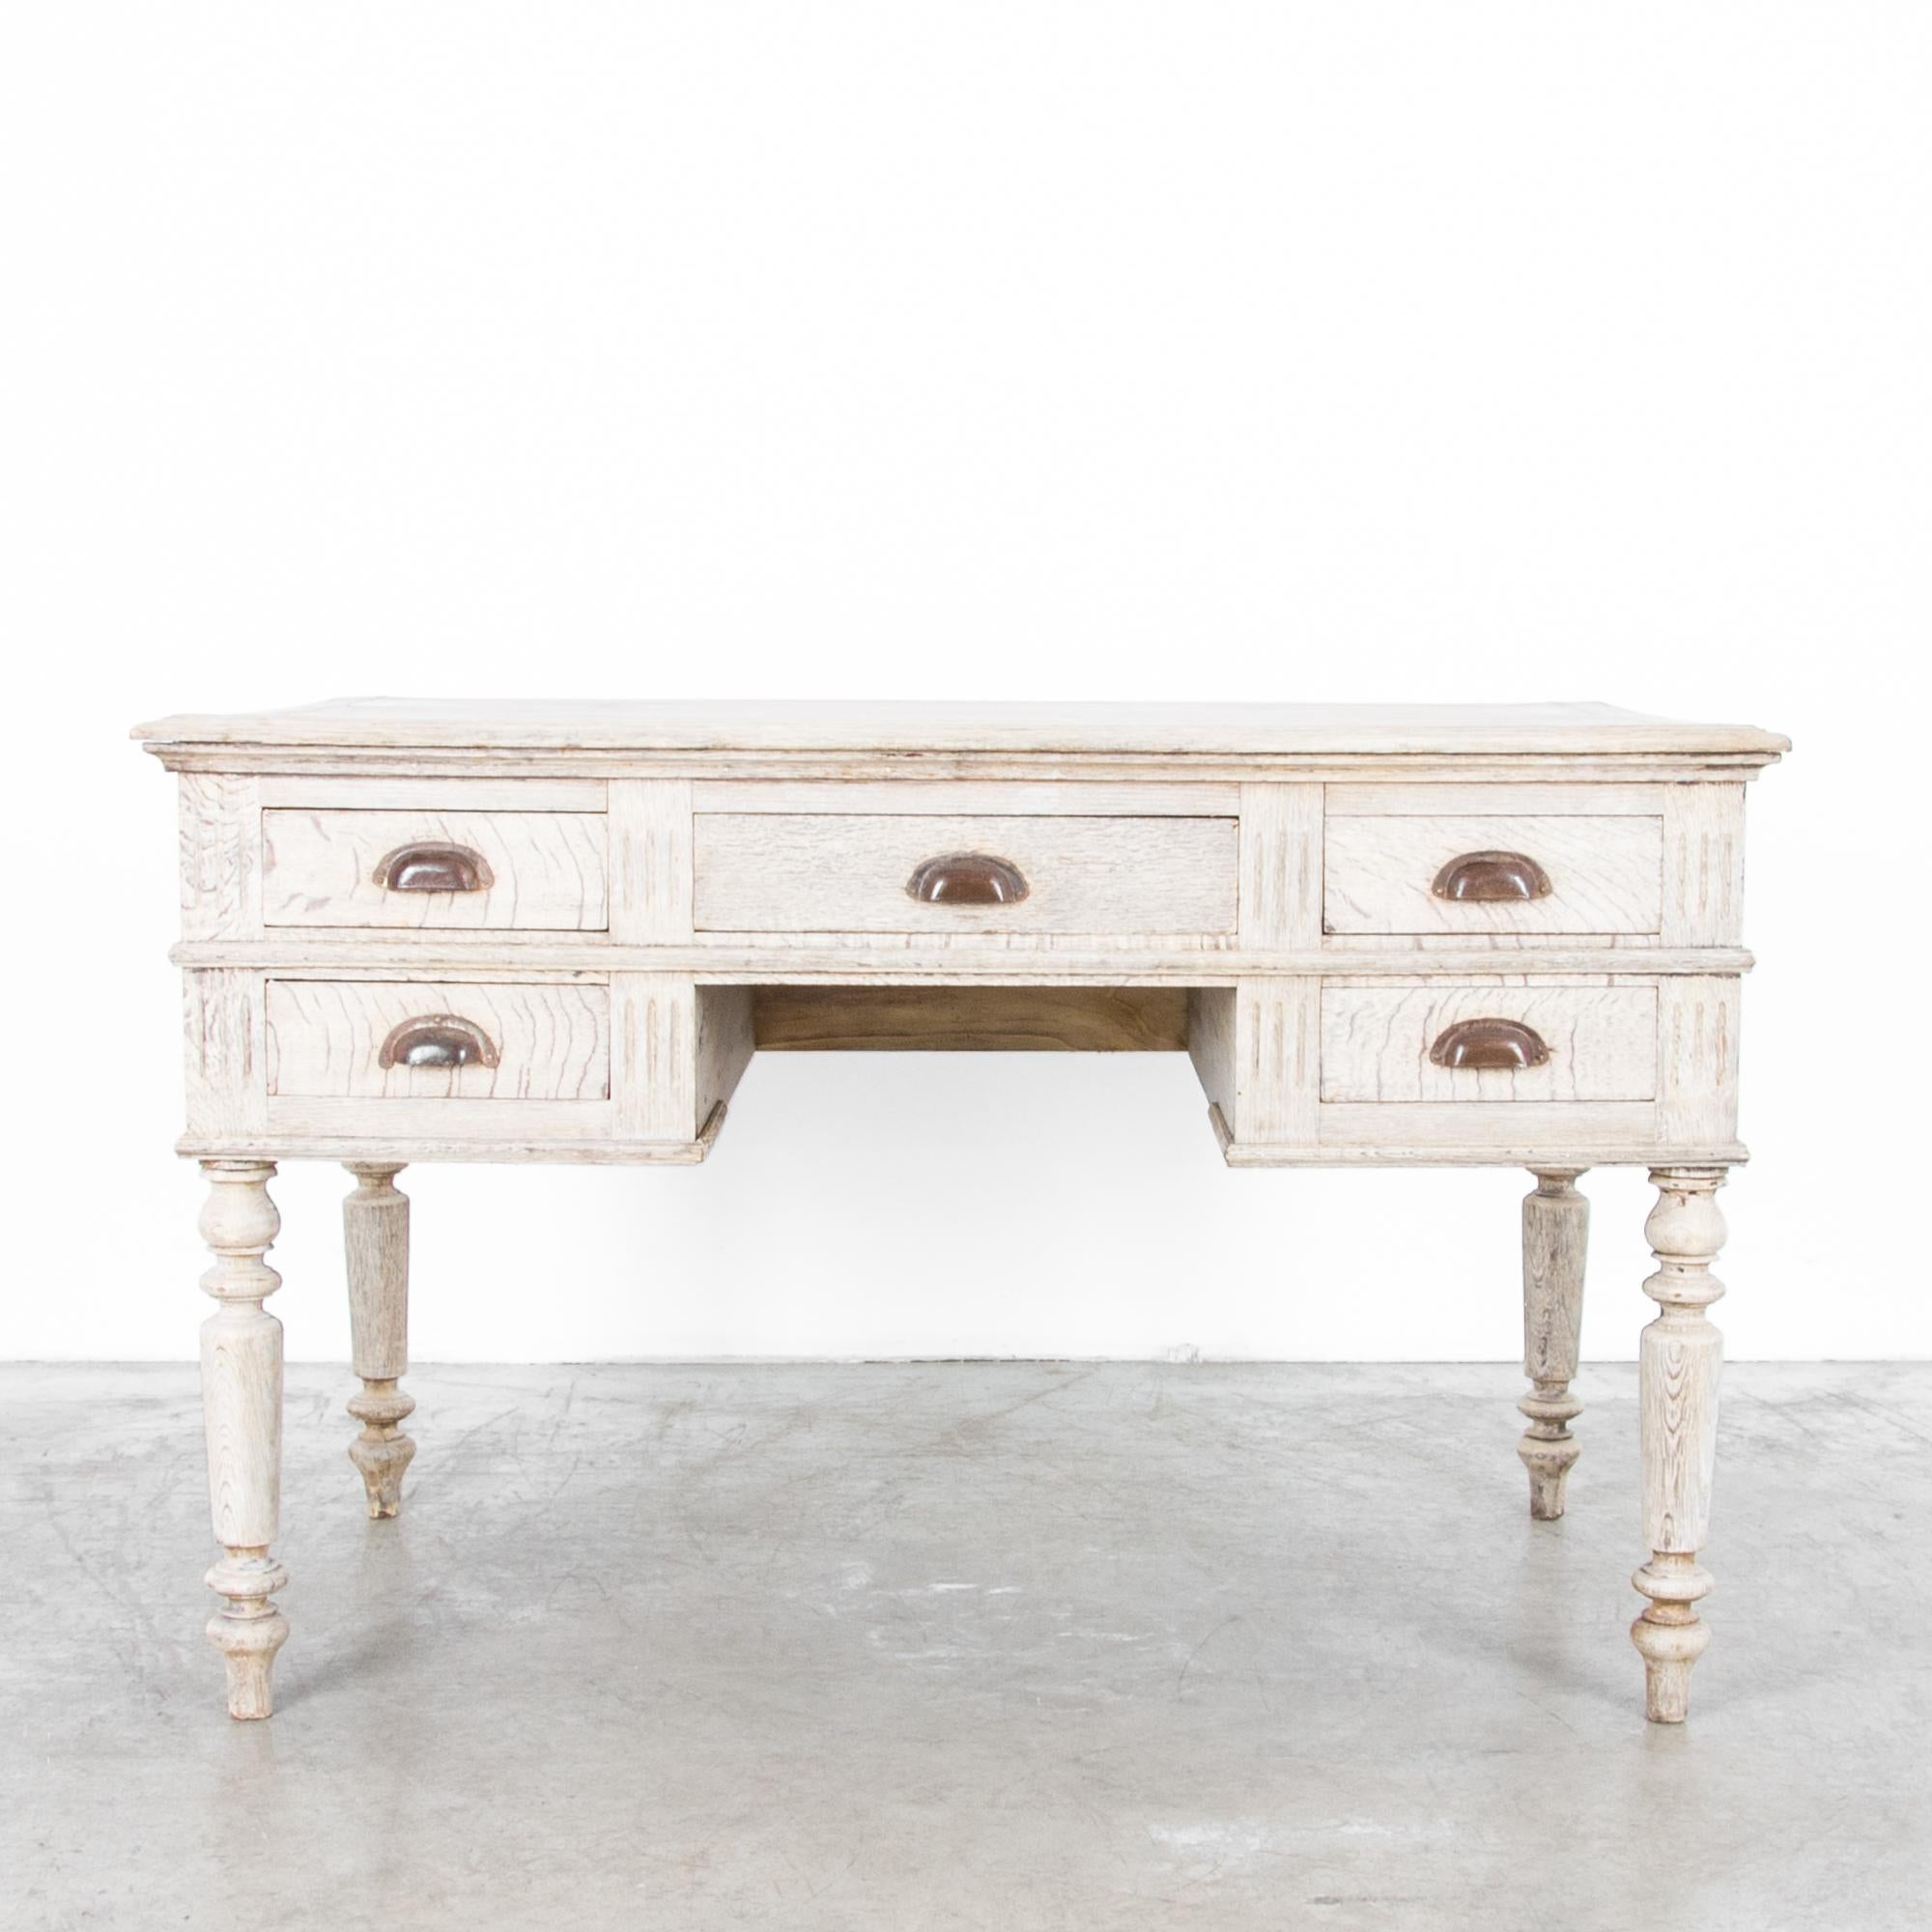 A oak desk from France, circa 1900, with five spacious drawers. A restrained neoclassical silhouette features tuned legs with a gentle taper and a tiered table ledge, while each drawer sports a metal drawer pull in a weathered bronze tone.